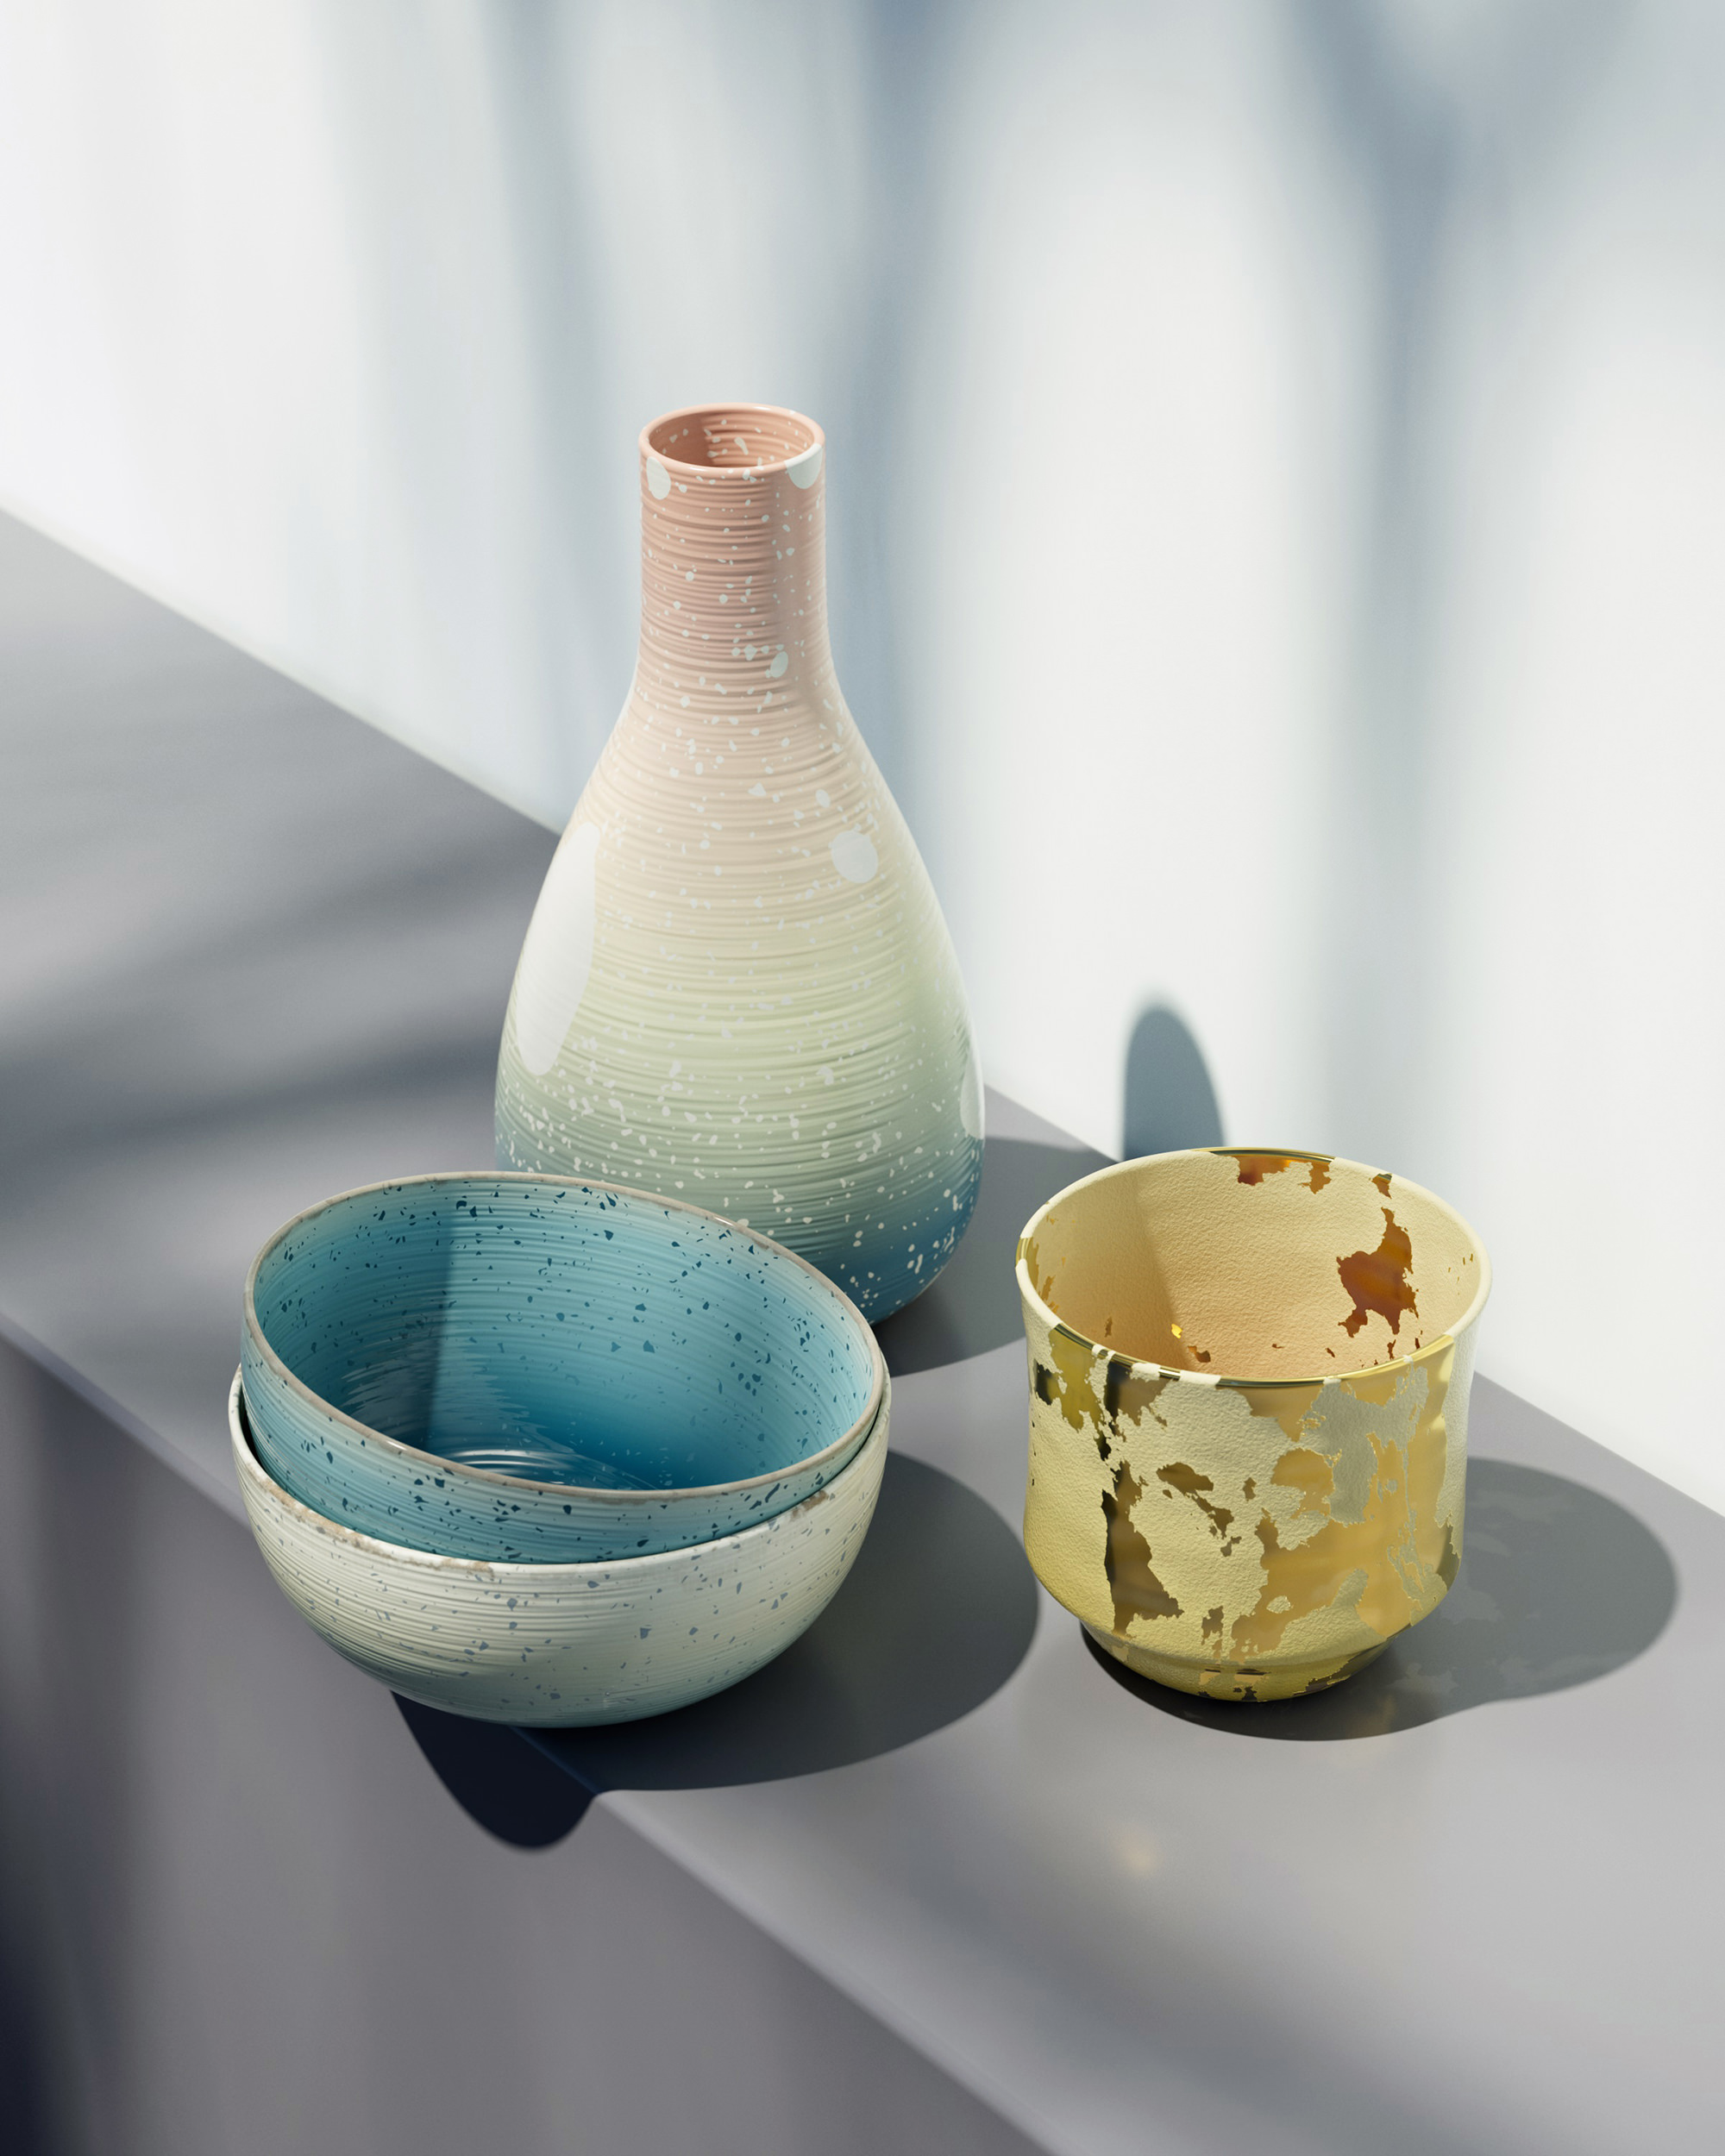 A 3D modelled scene of realistic colourful ceramic objects